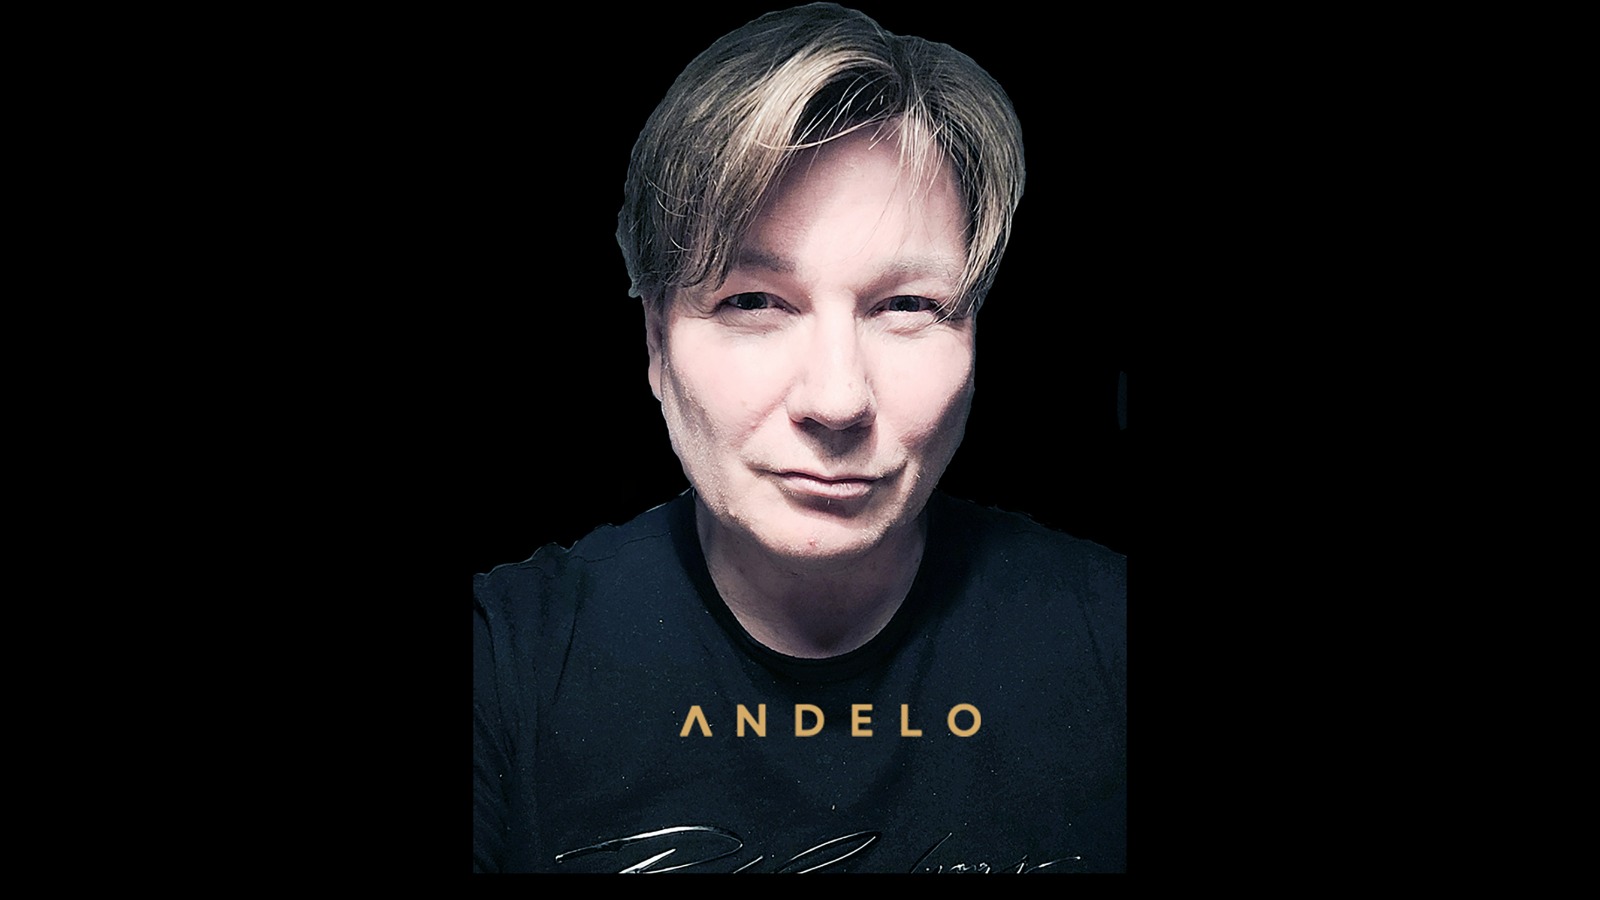 ANDELO - ‘Shattered’ shows the power of music Buddy Nelson 